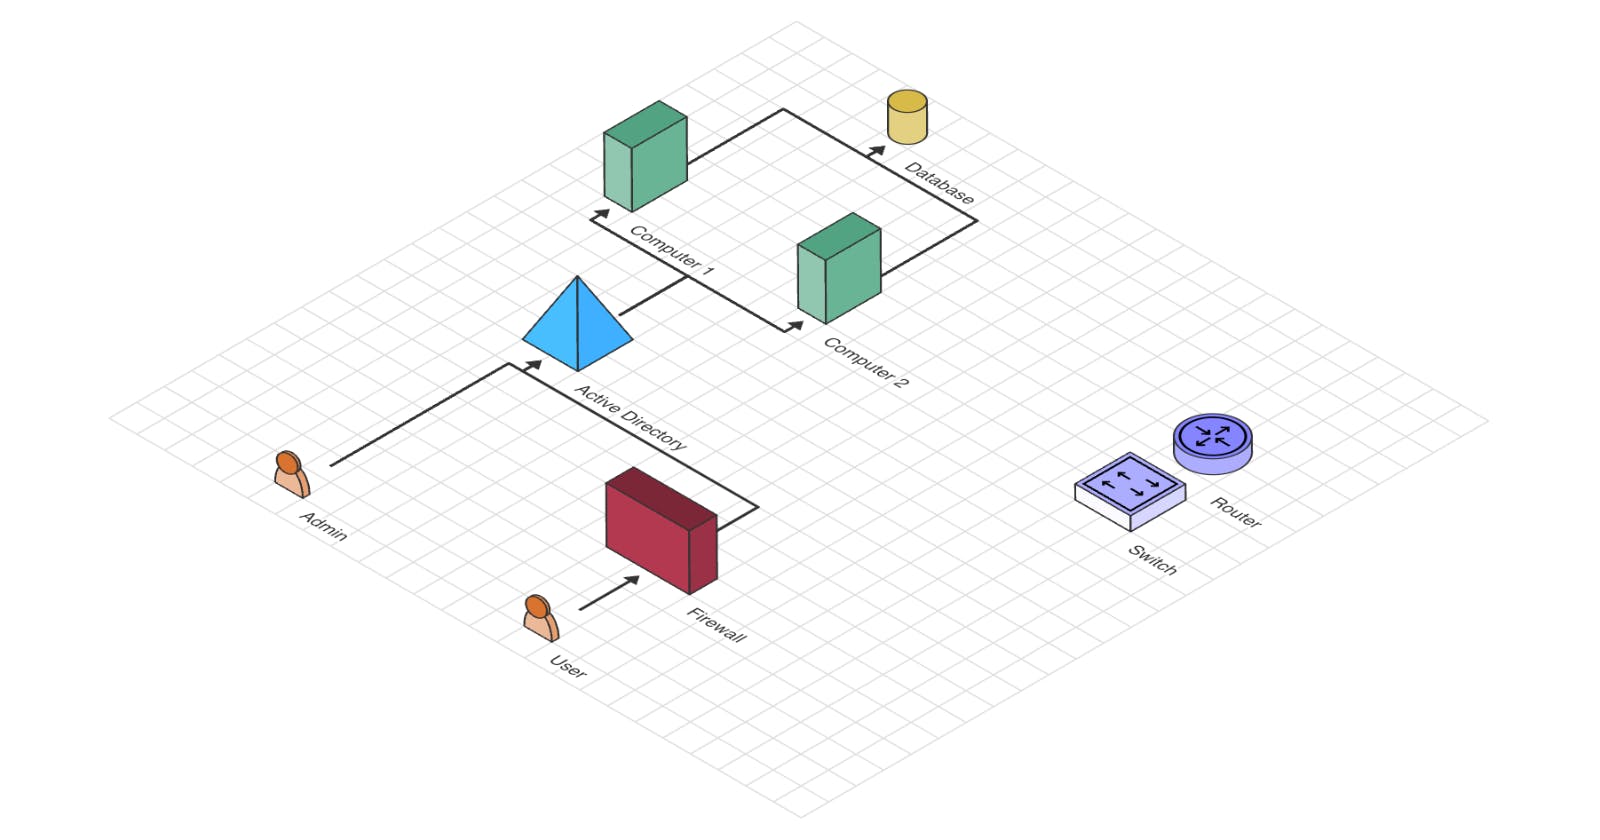 How to create isometric diagrams using SVG